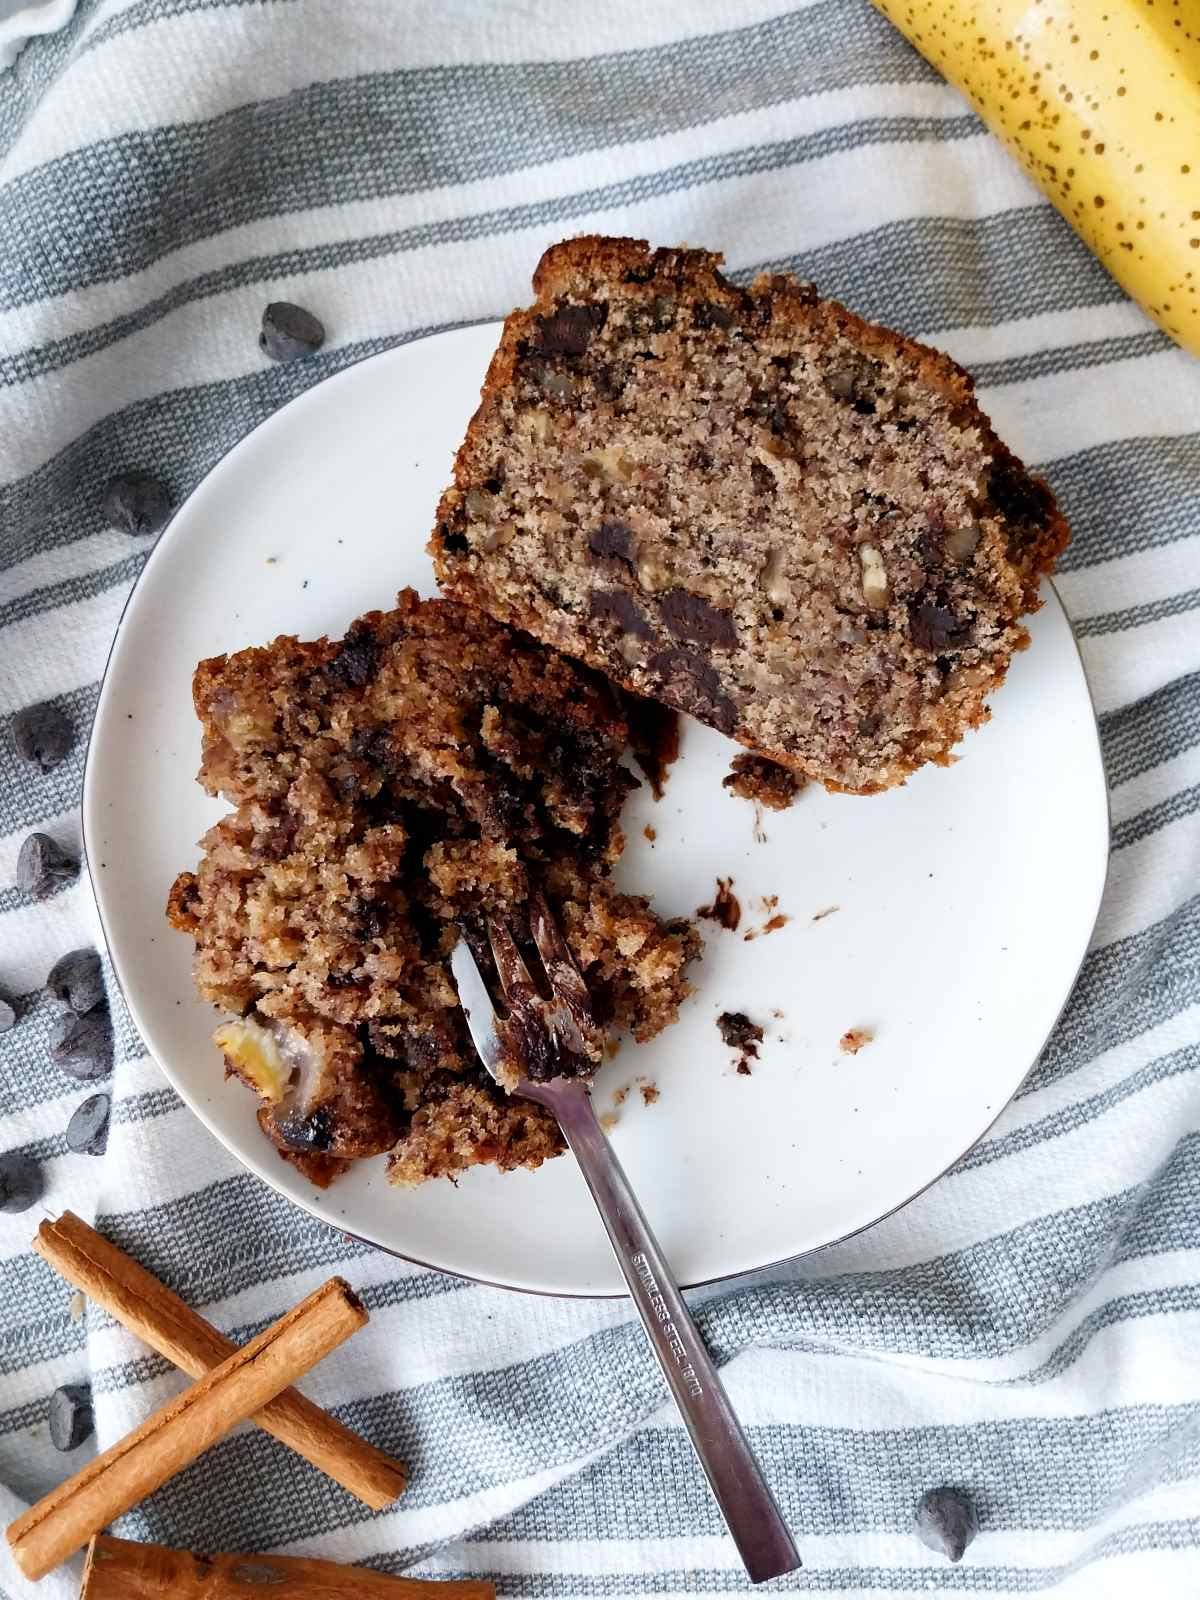 Two banana bread slices on a white plate with a little fork.